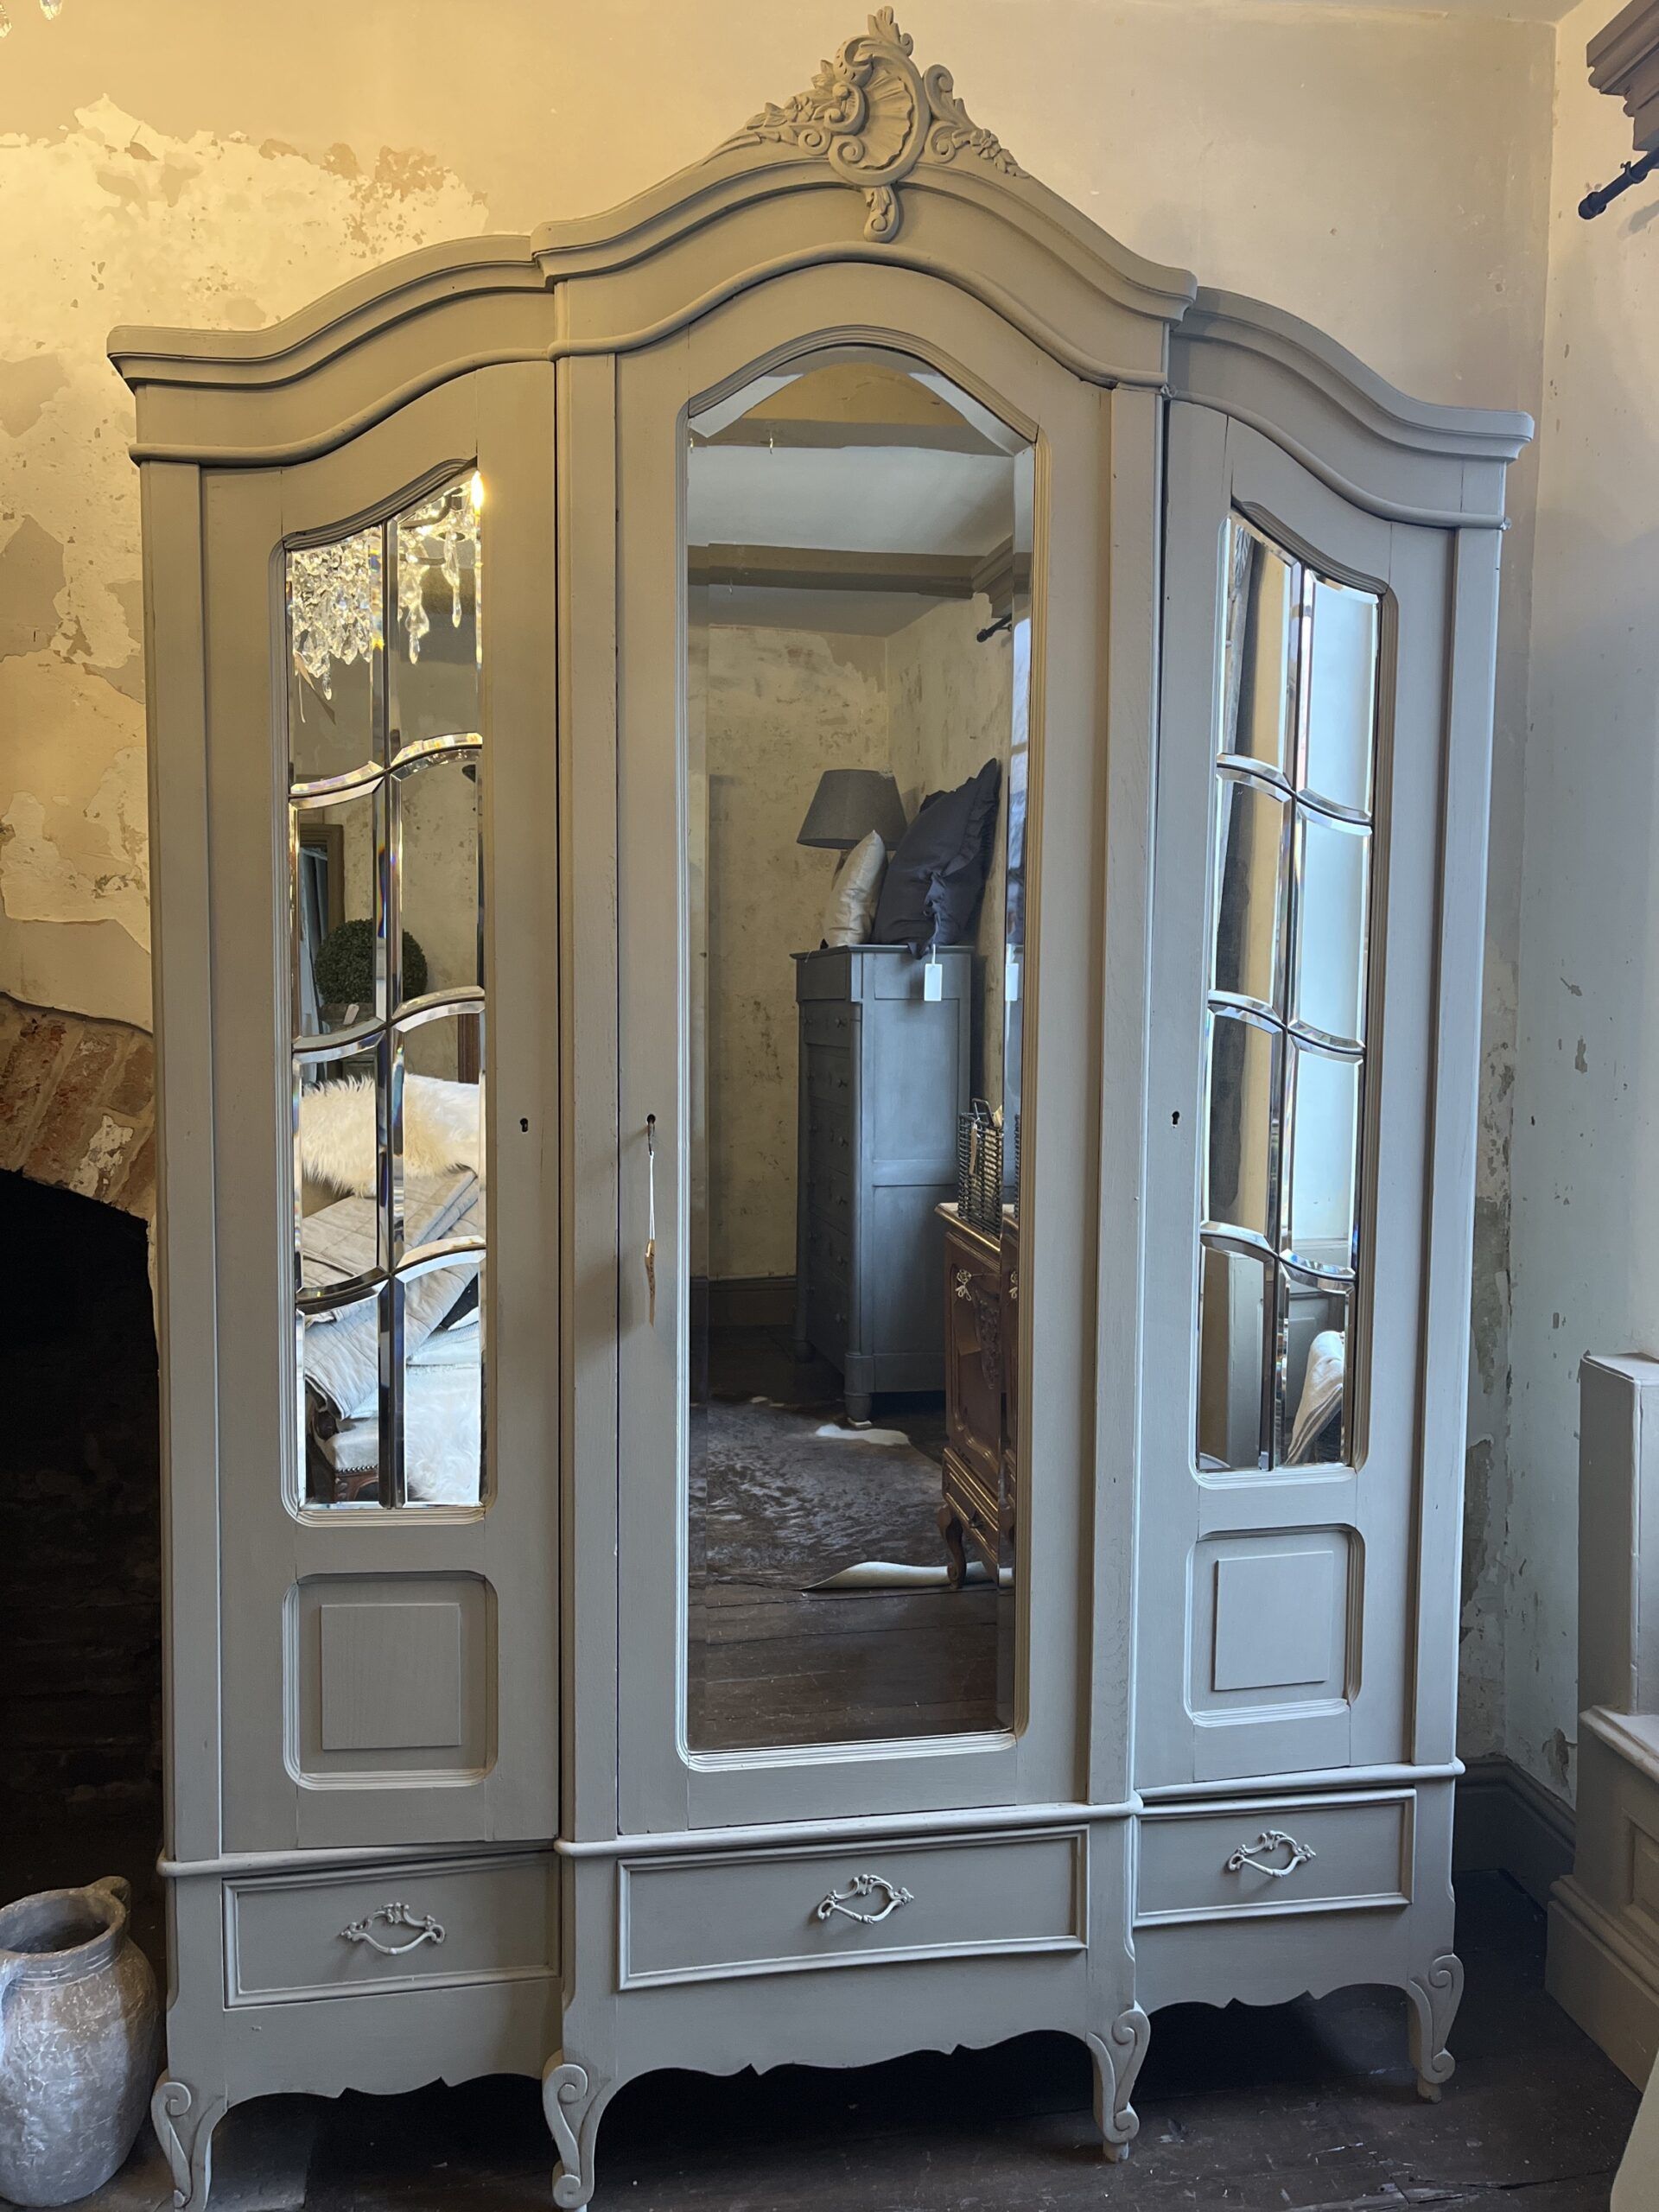 Armoires – Wardrobes – Vitrines | Village Chic For French Wardrobes For Sale (View 9 of 15)